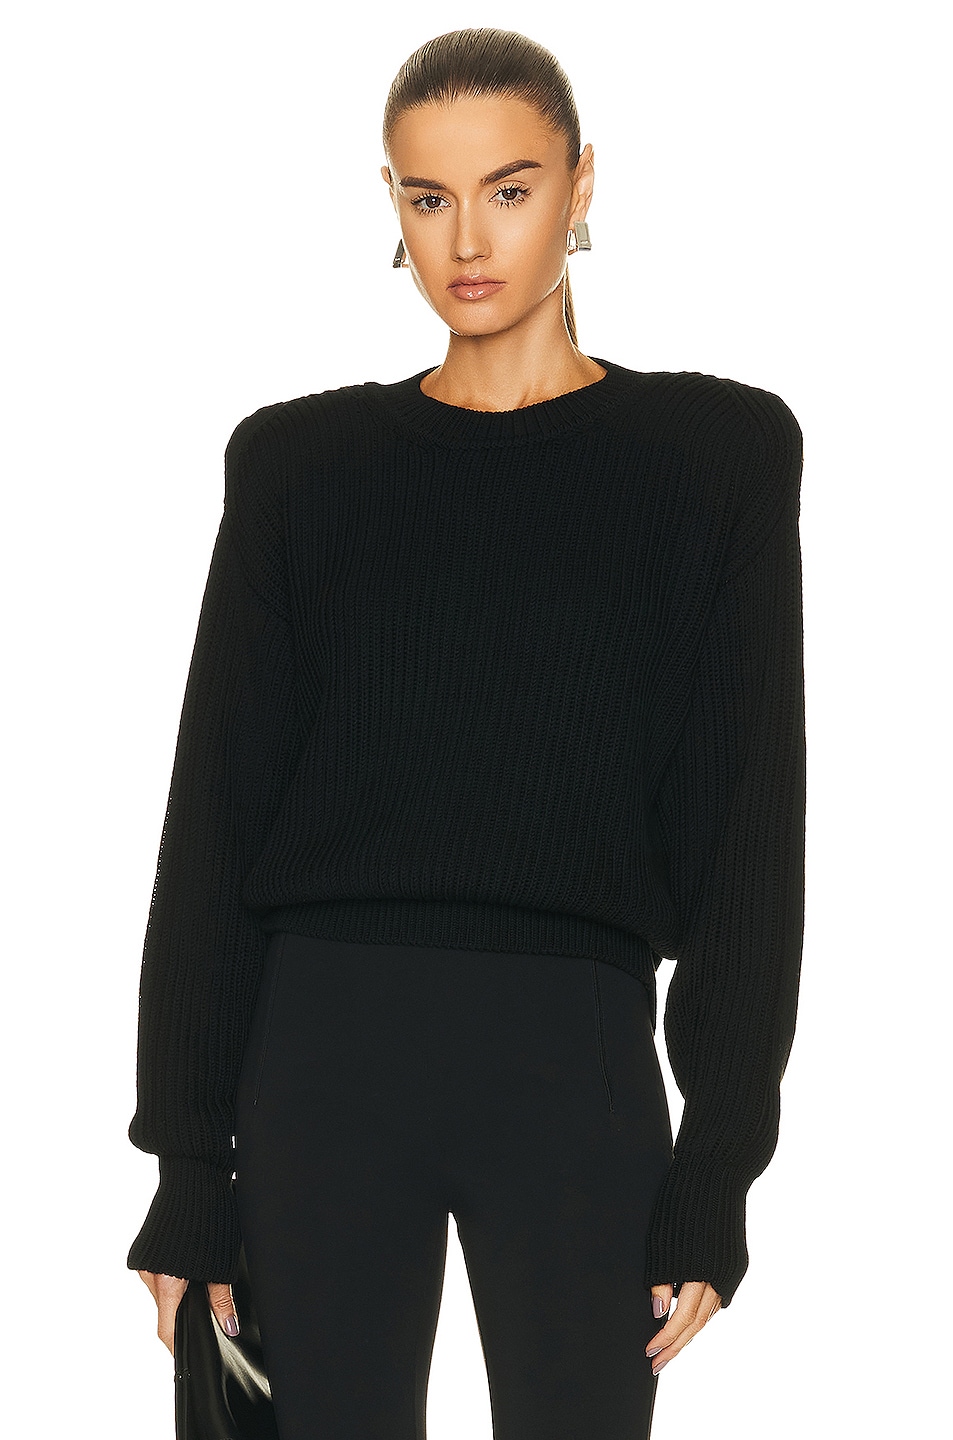 Image 1 of WARDROBE.NYC x Hailey Bieber Hb Knit Sweater in Black